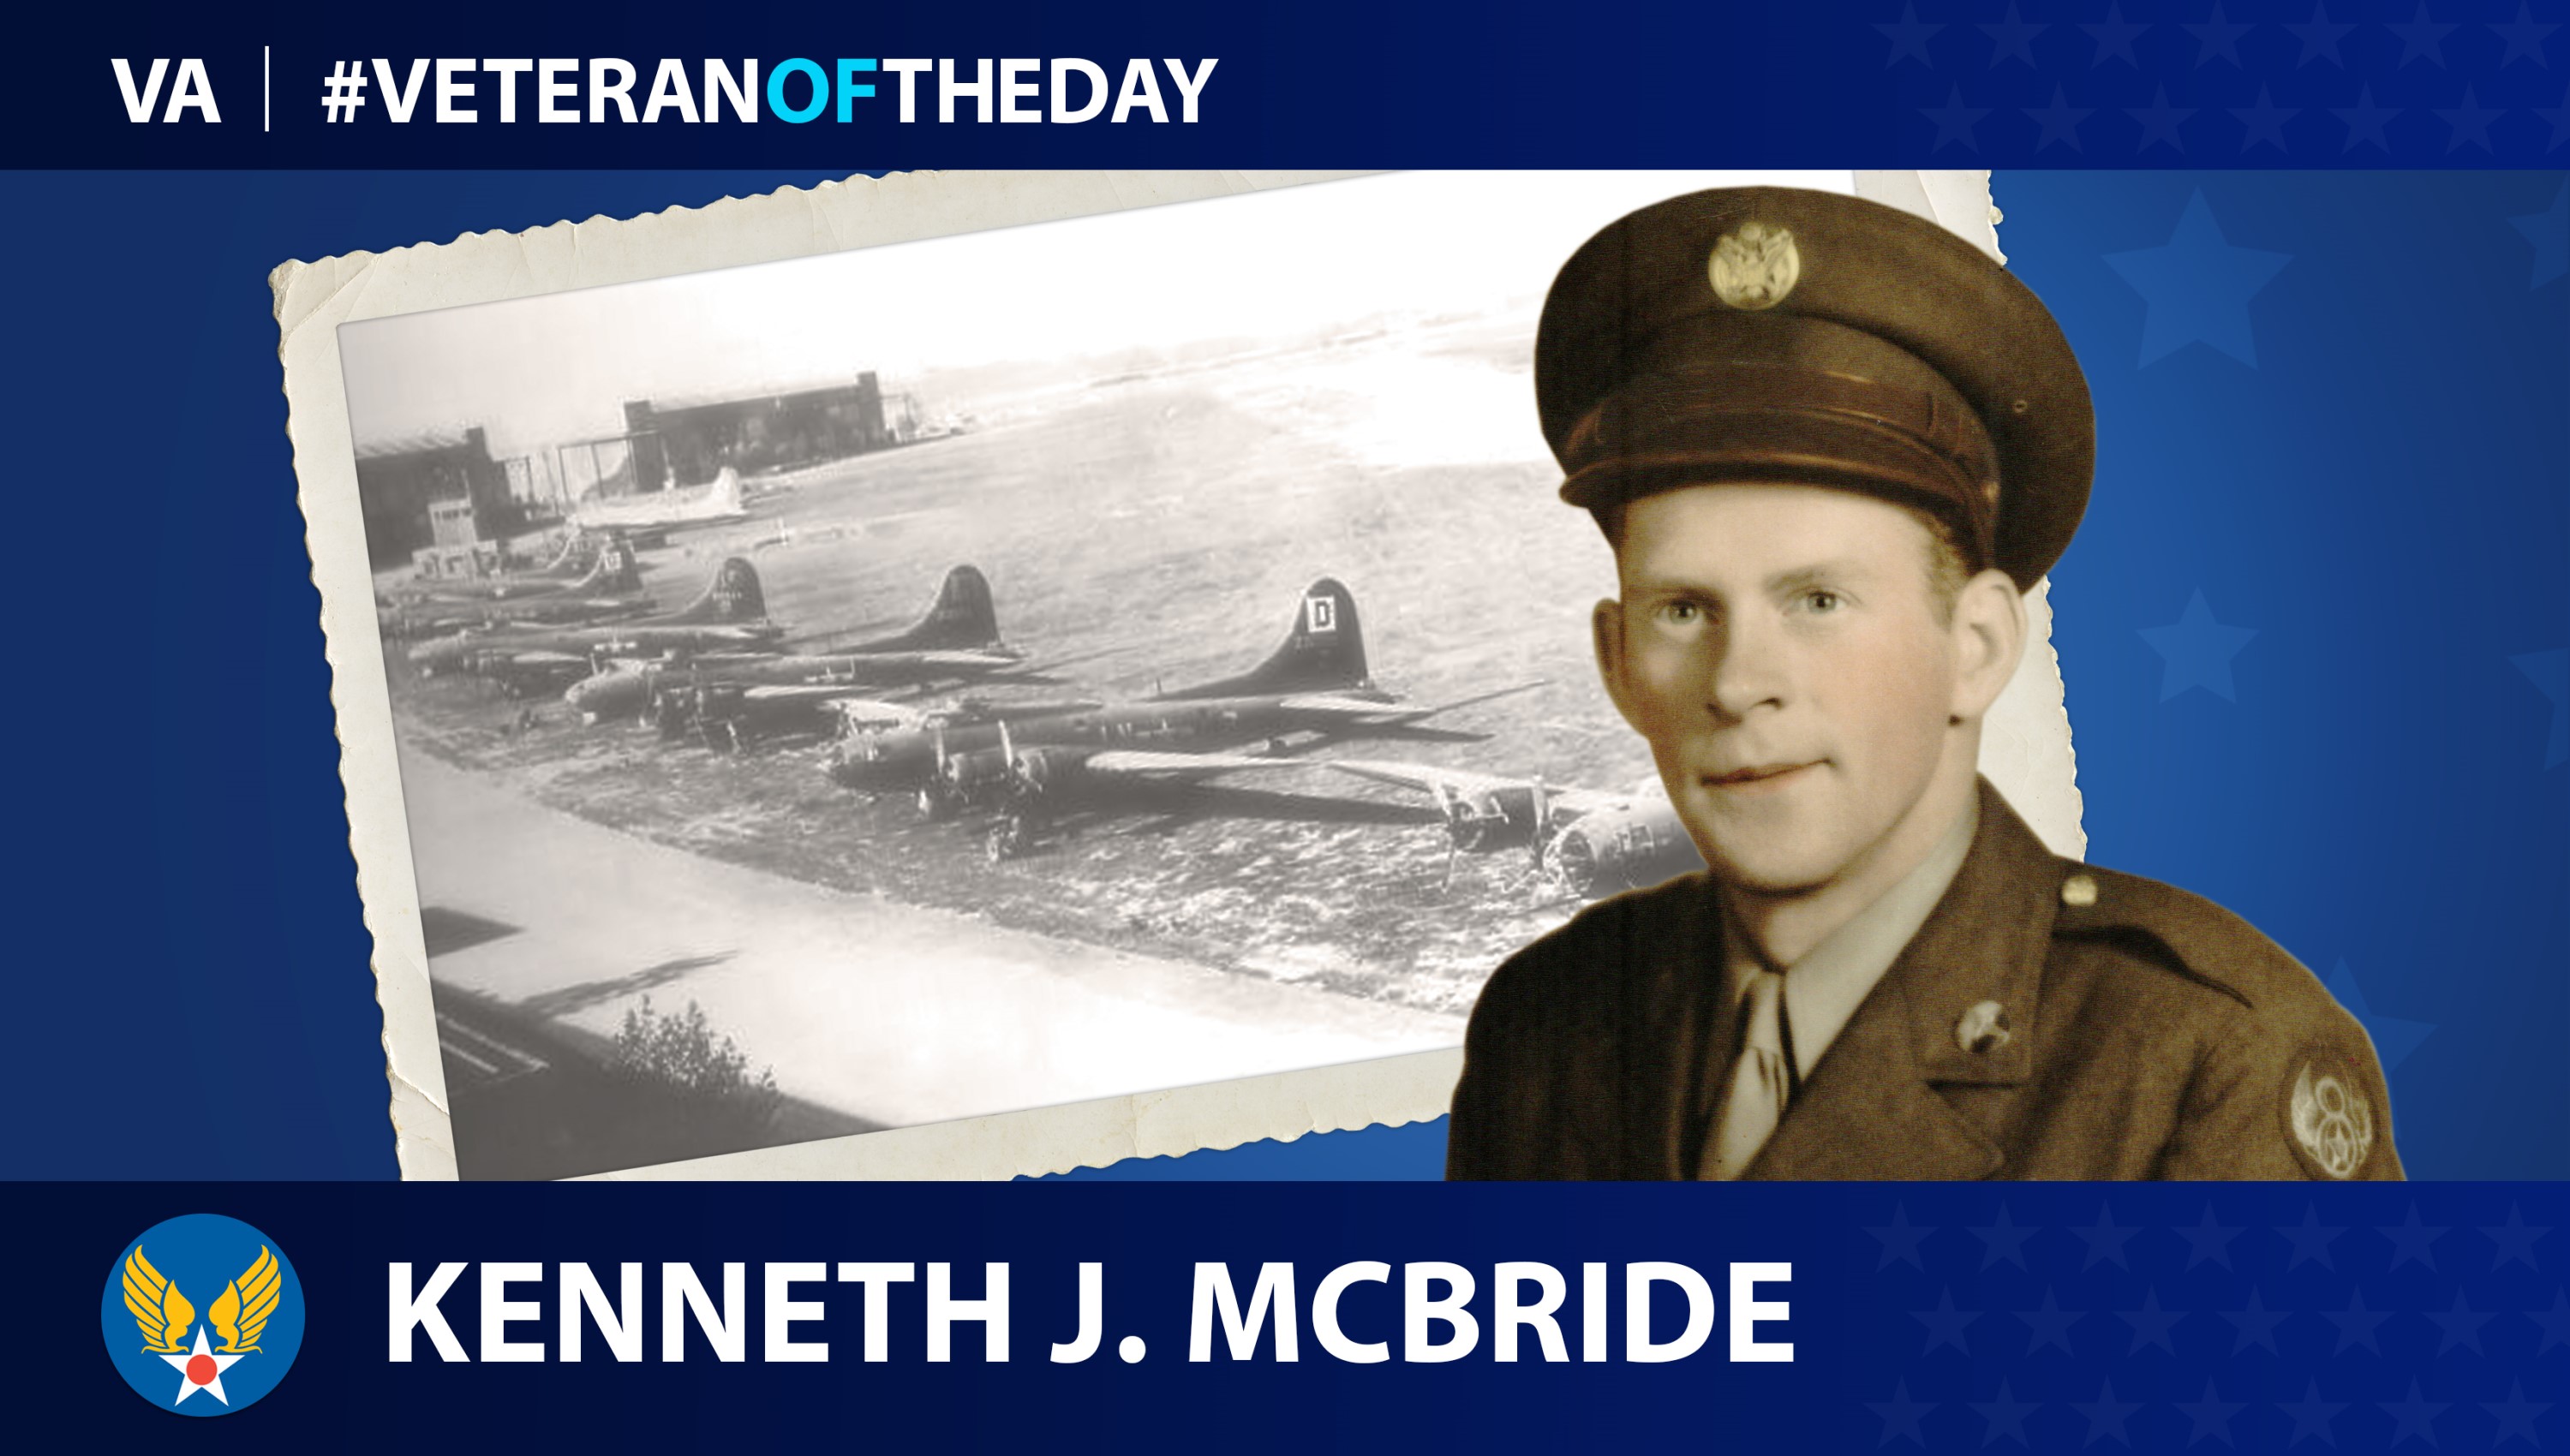 Kenneth J. McBride is today's Veteran of the Day.